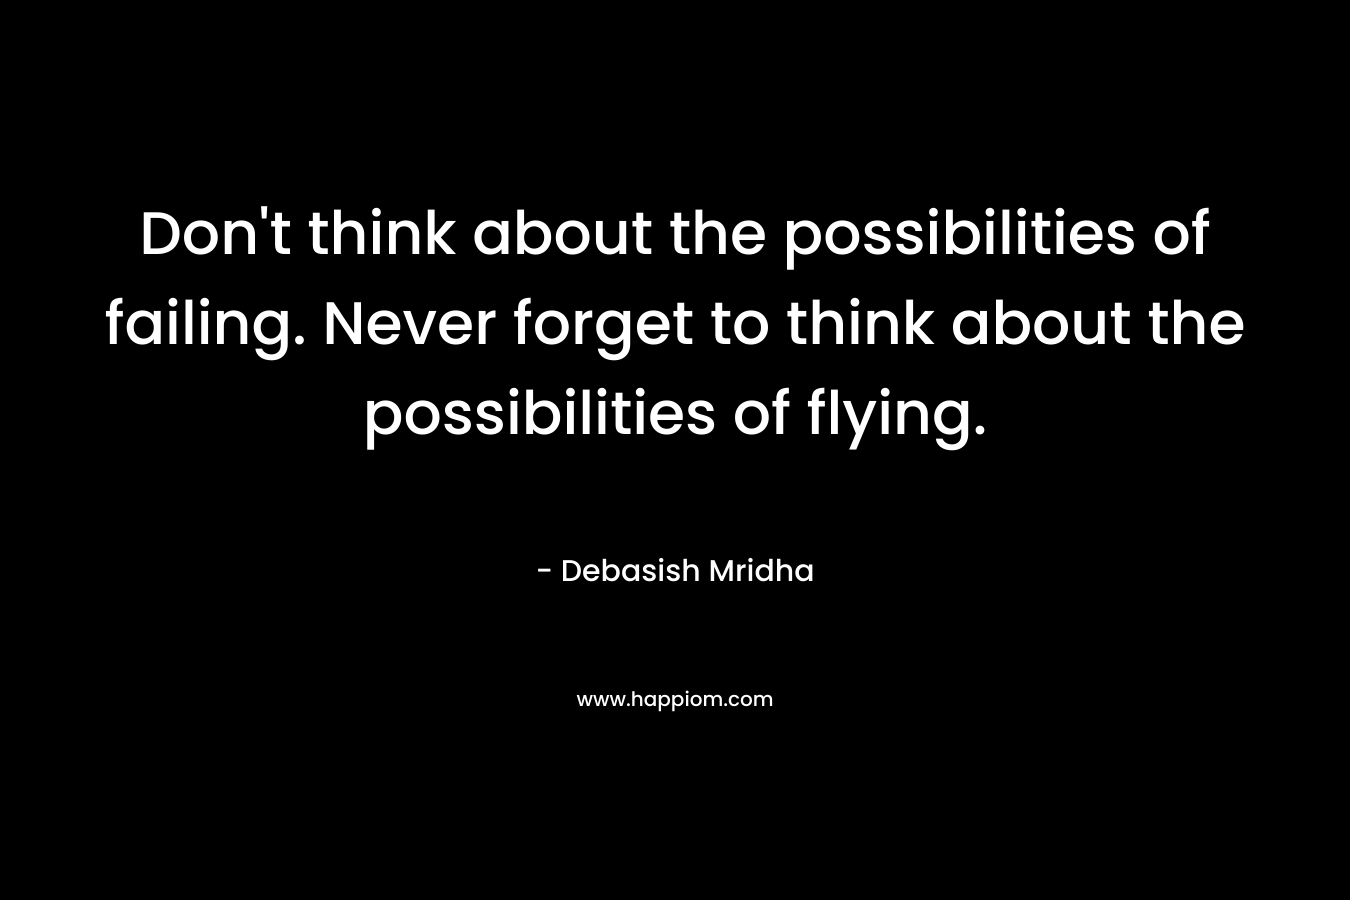 Don't think about the possibilities of failing. Never forget to think about the possibilities of flying.